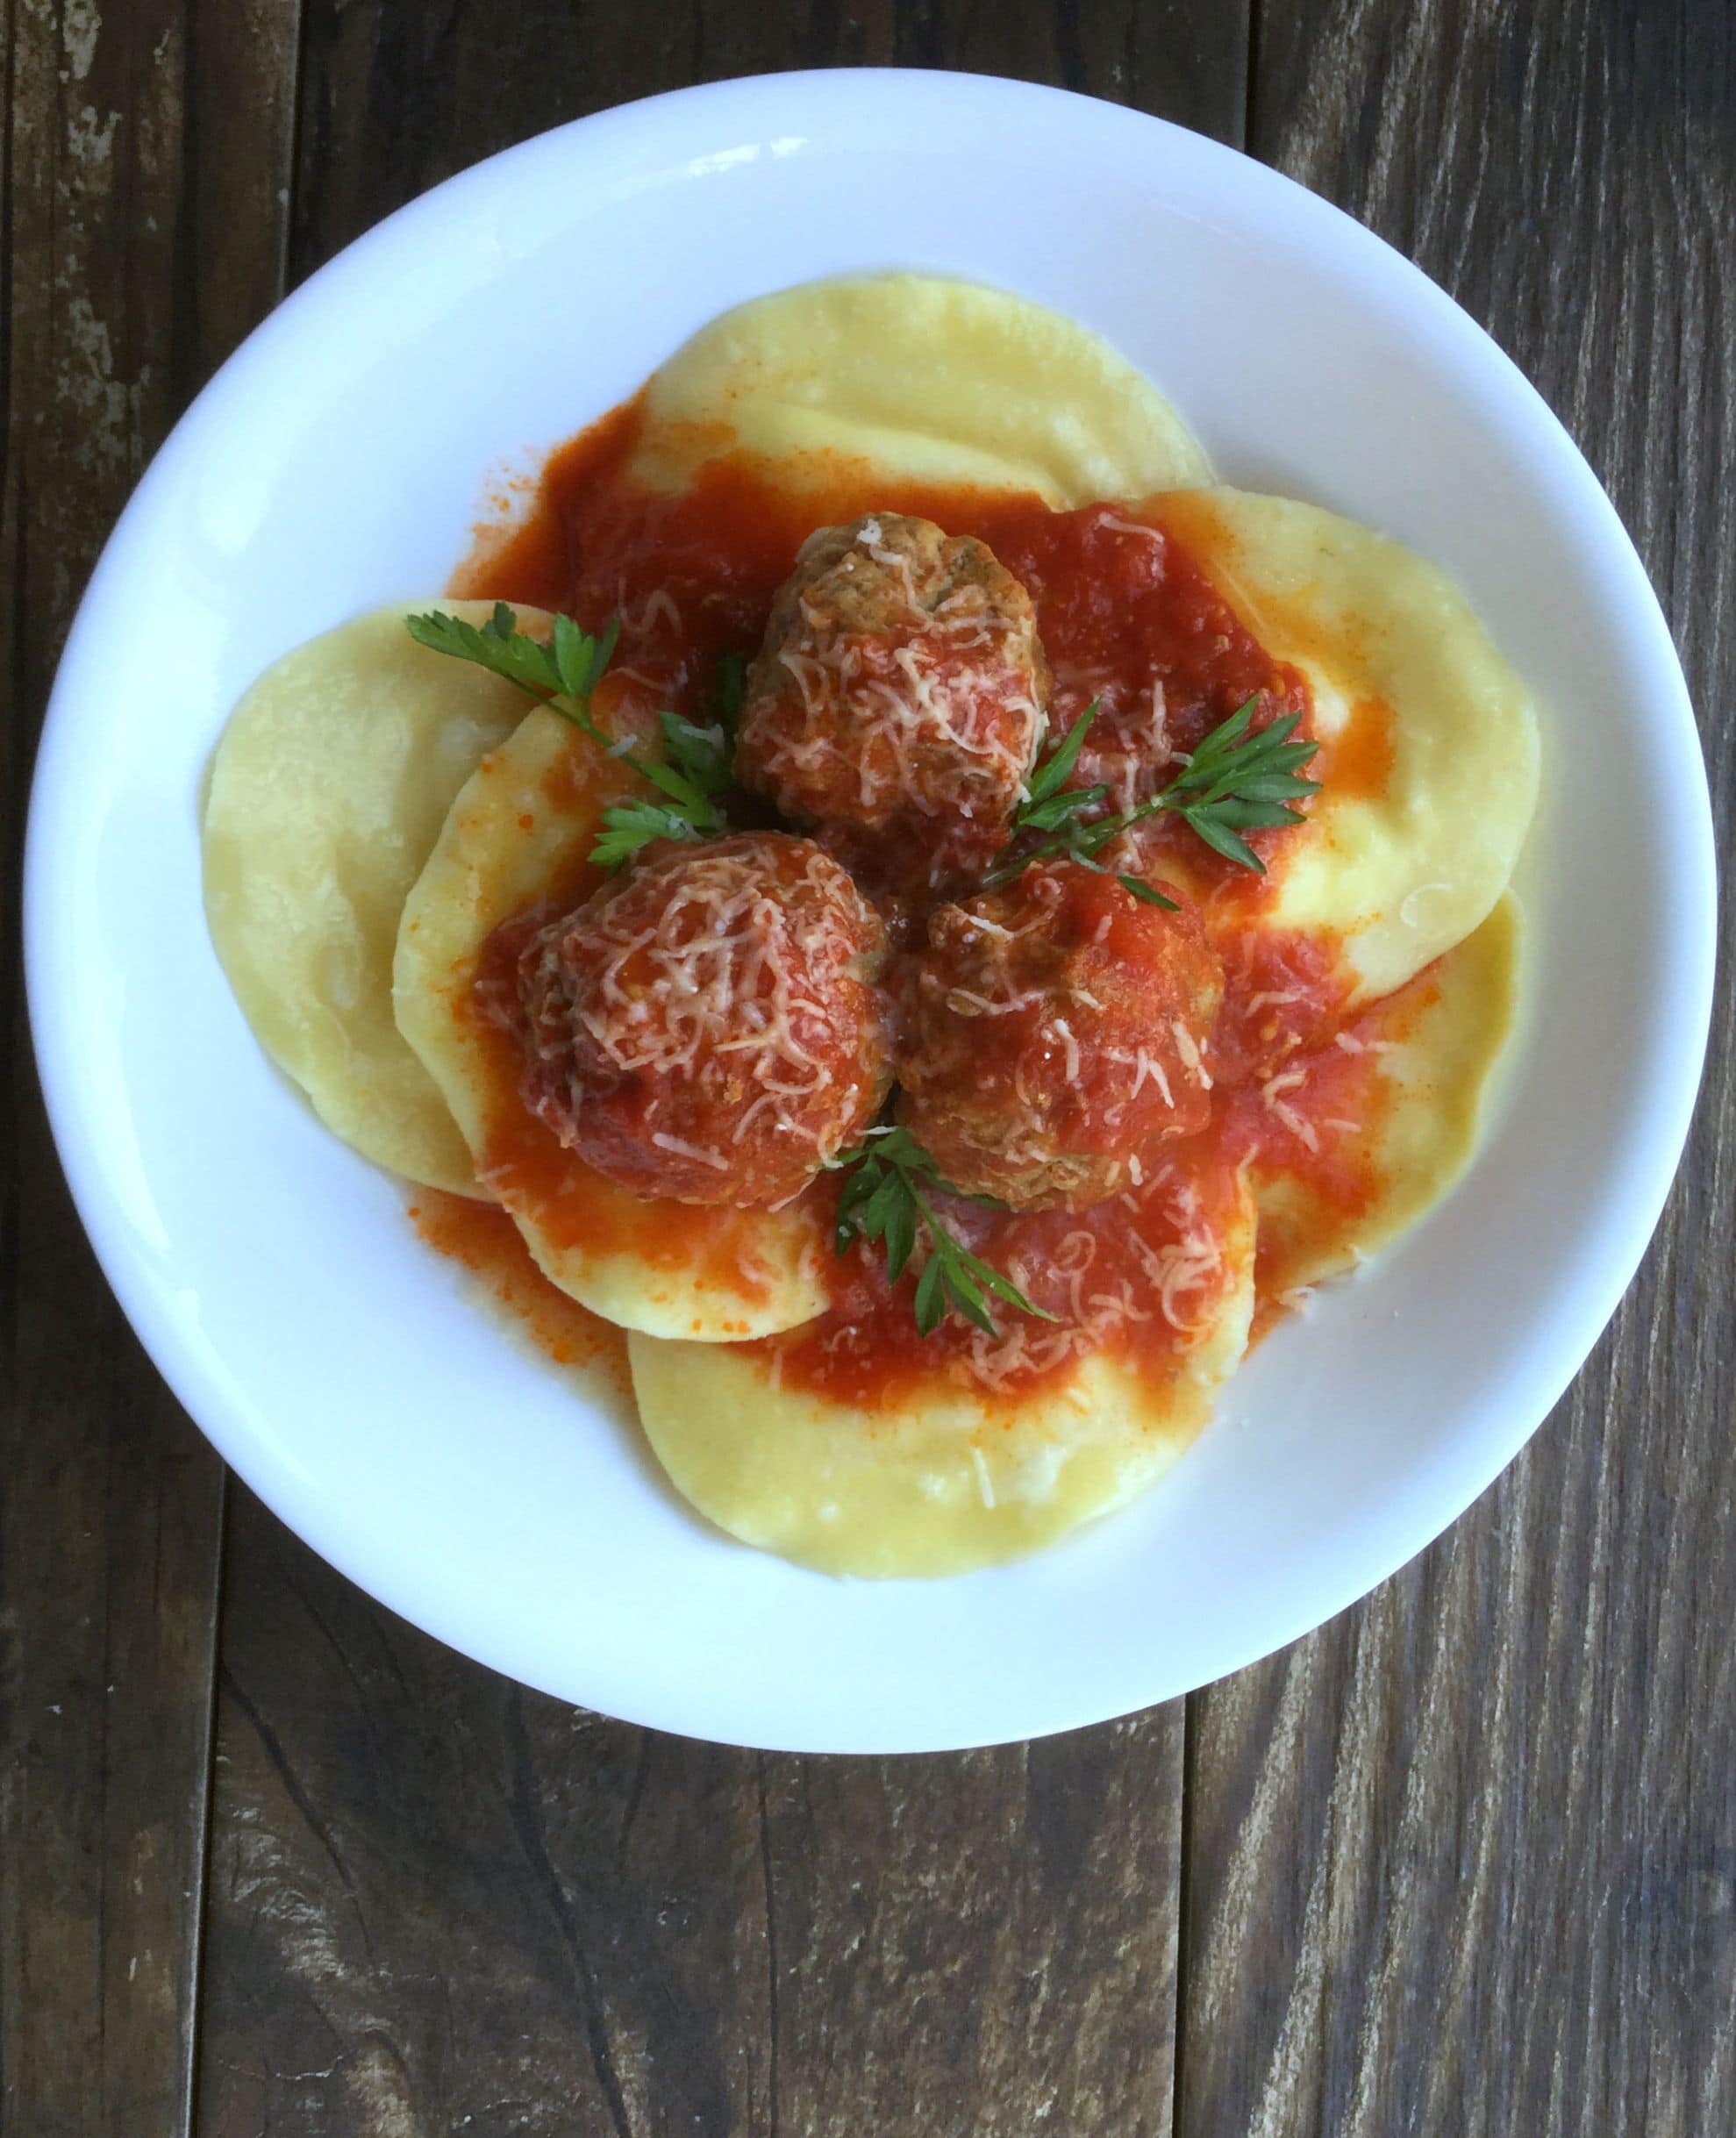 This is a delicious and classic italian recipe, meatballs made with hamburger meat, veal and pork.